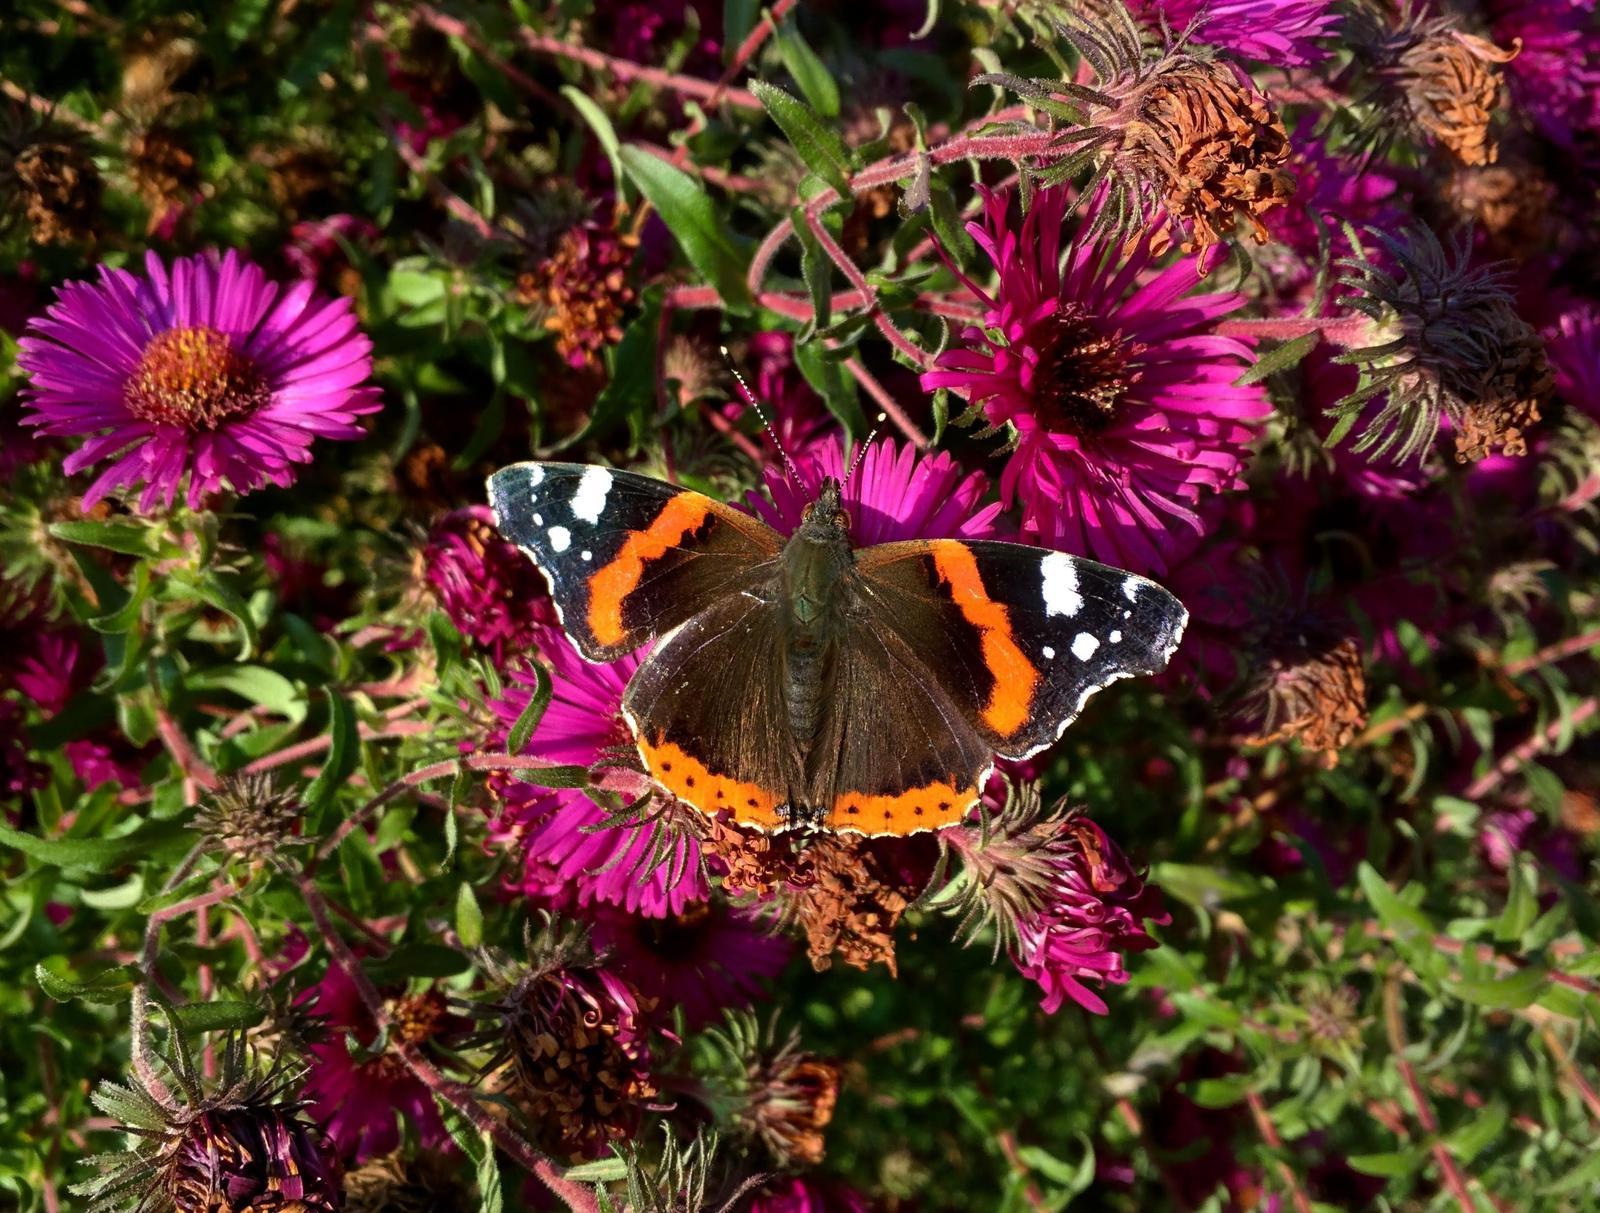 Red Admiral Photo by Robbin Knapp